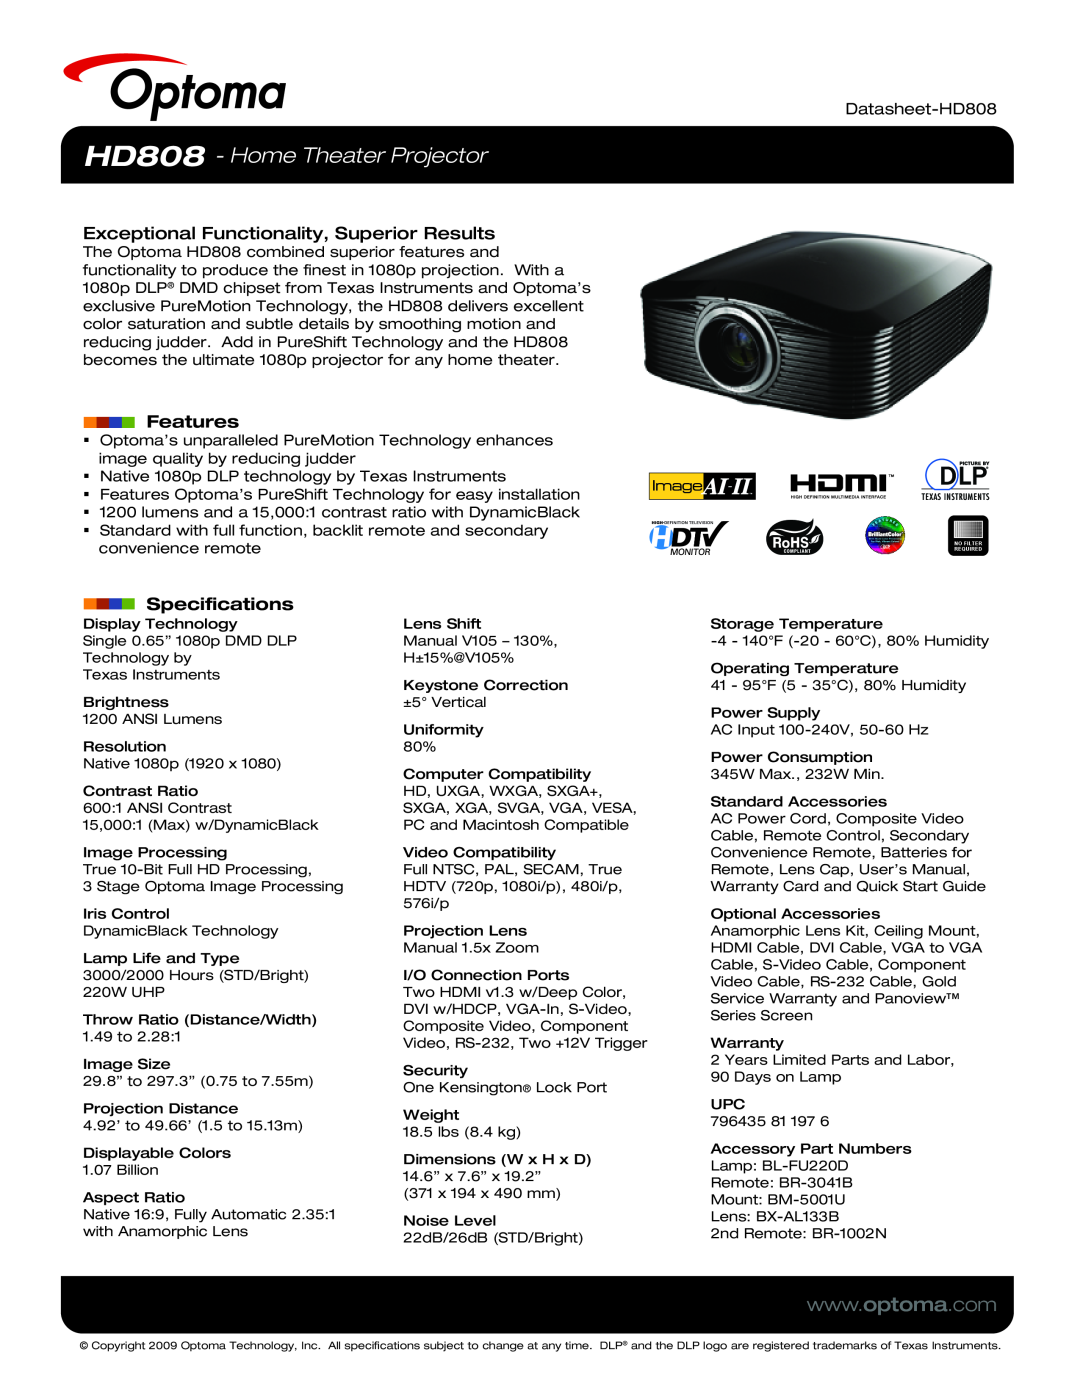 Optoma Technology specifications HD808 - Home Theater Projector, Exceptional Functionality, Superior Results, Features 